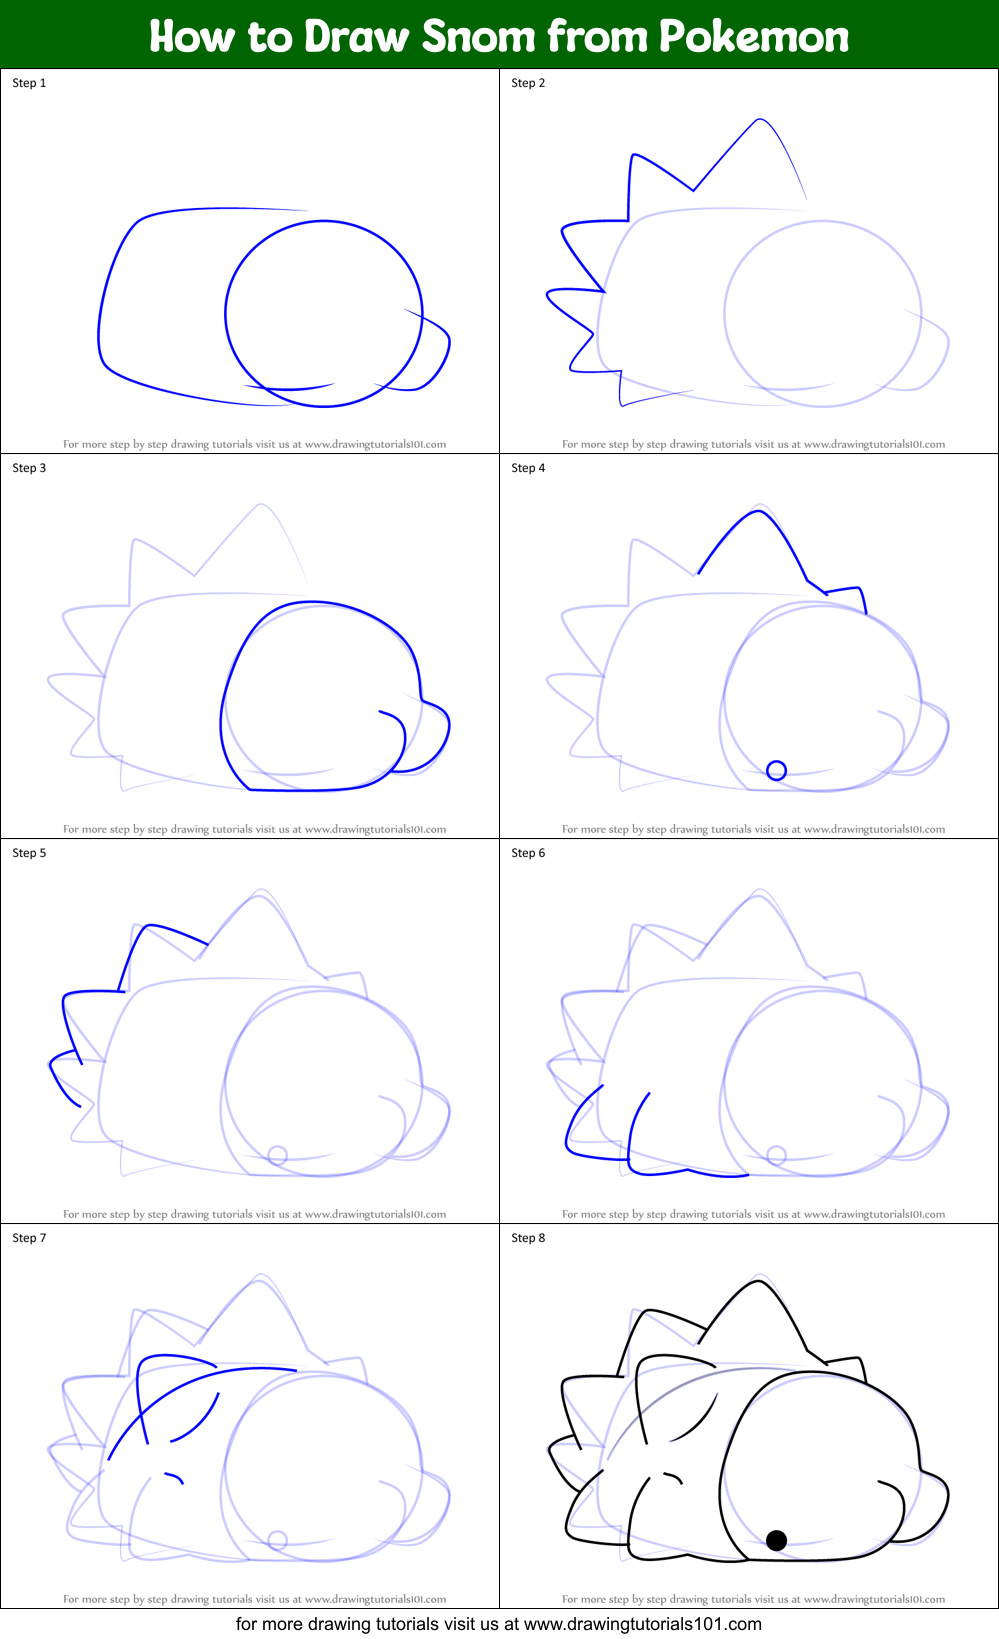 How to Draw Snom from Pokemon printable step by step drawing sheet